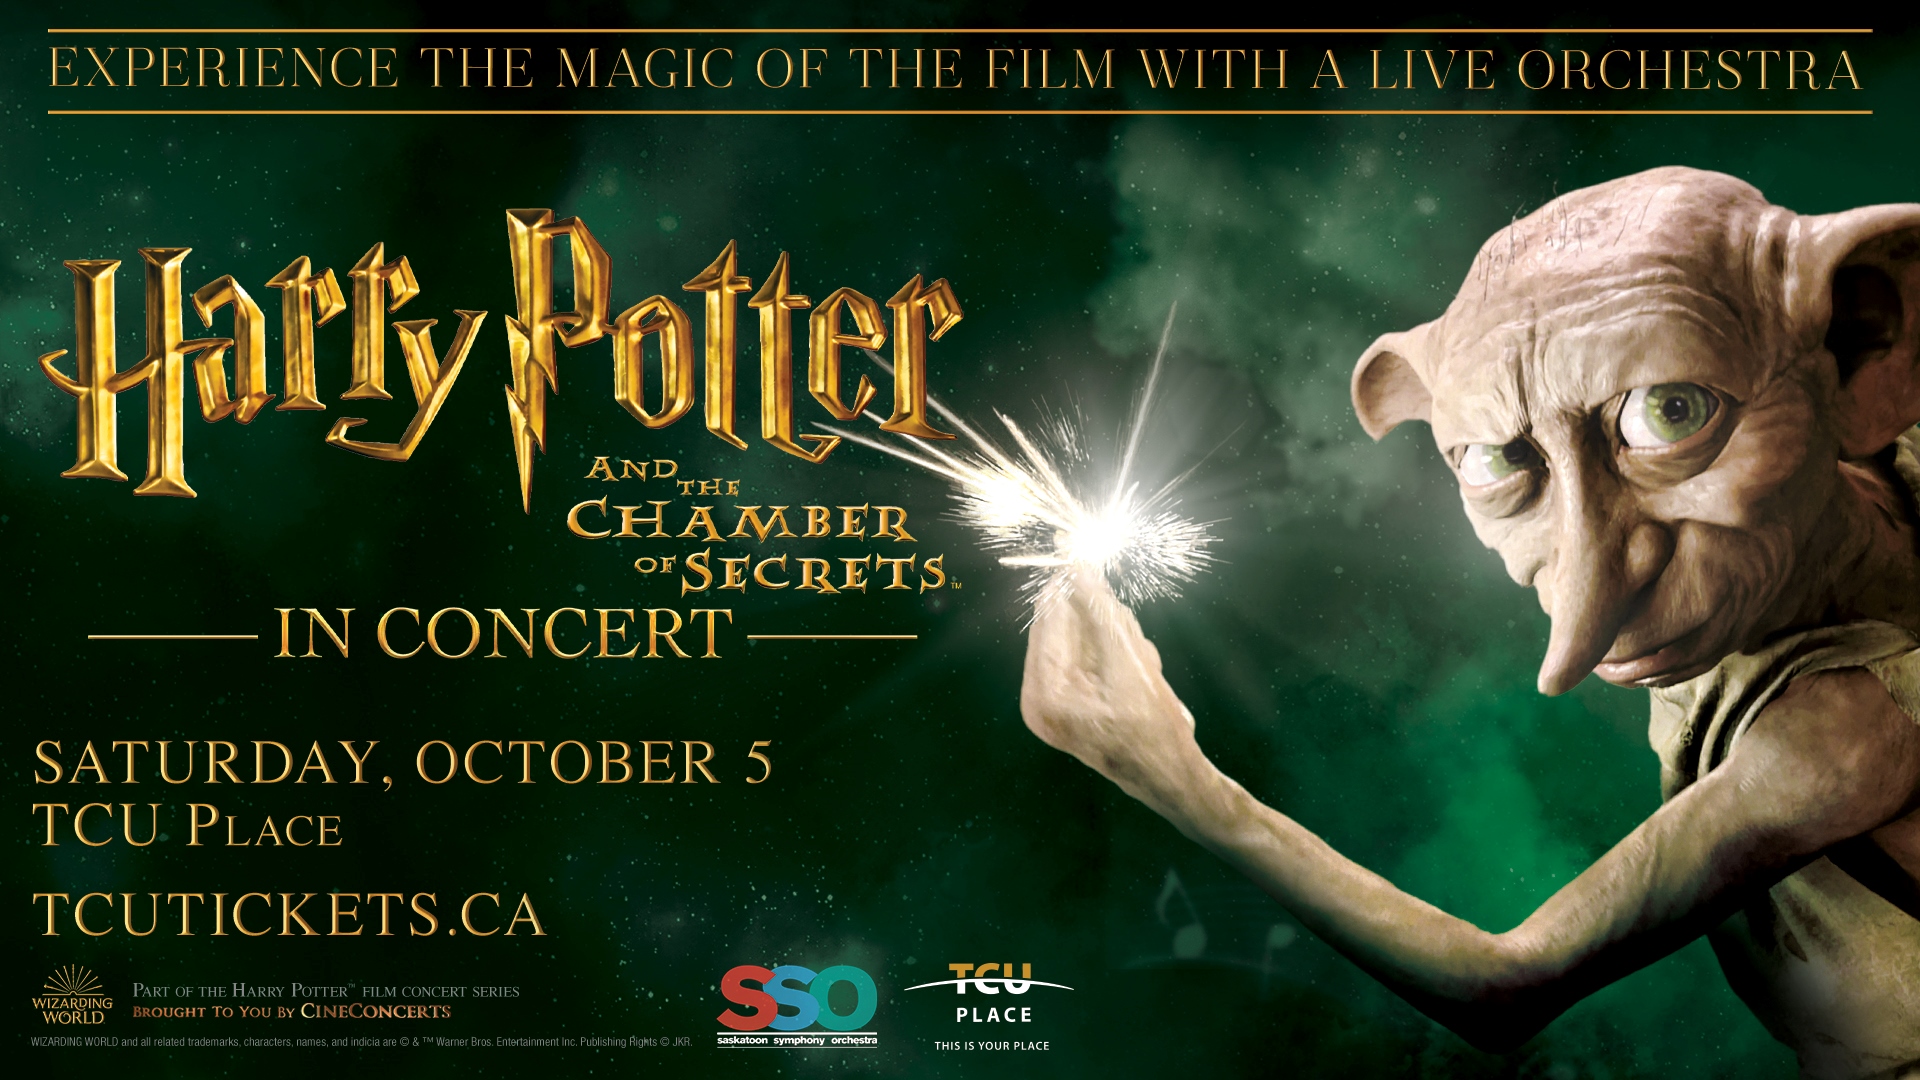 Harry Potter and the Chamber of Secrets In Concert - Oct 5th at TCU Place